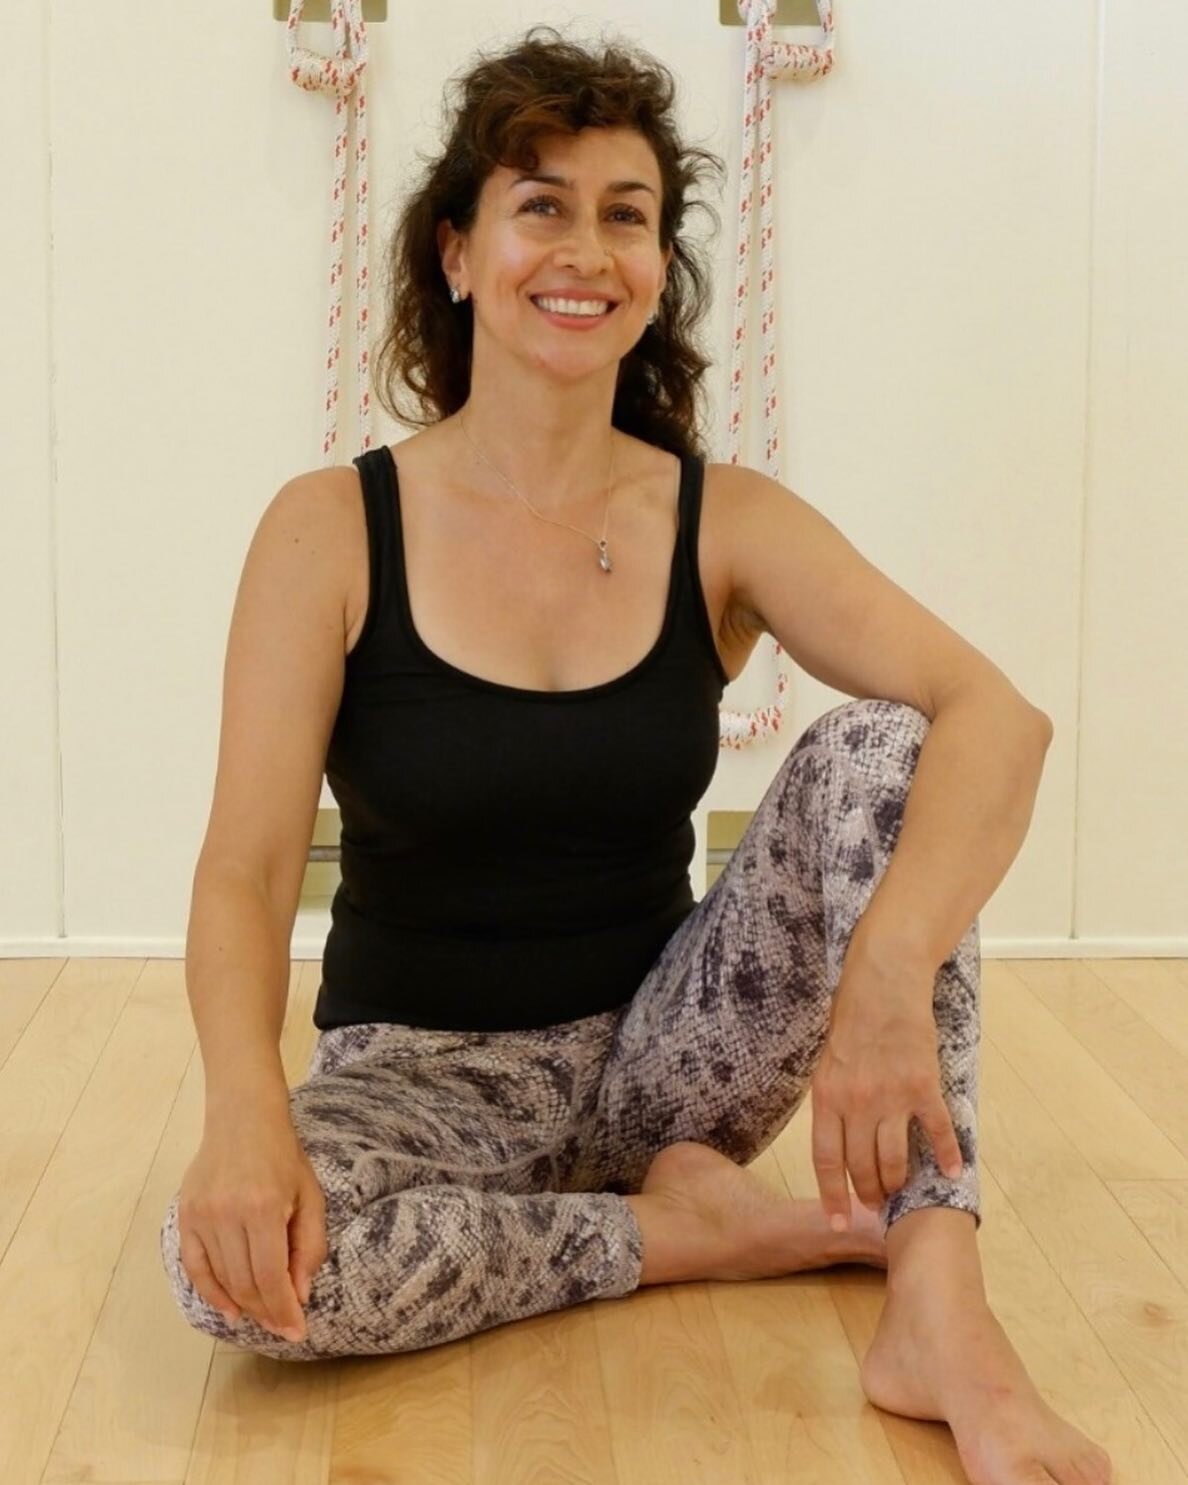 Join me this morning at 10am @the_corner_studio_yoga for more hip opening through the path of standing postural flow to a final stabilizing prone posture in ARDHA KAPOTASANA: Pigeon pose In-person or Hybrid! Walk outside feeling better in your hips -